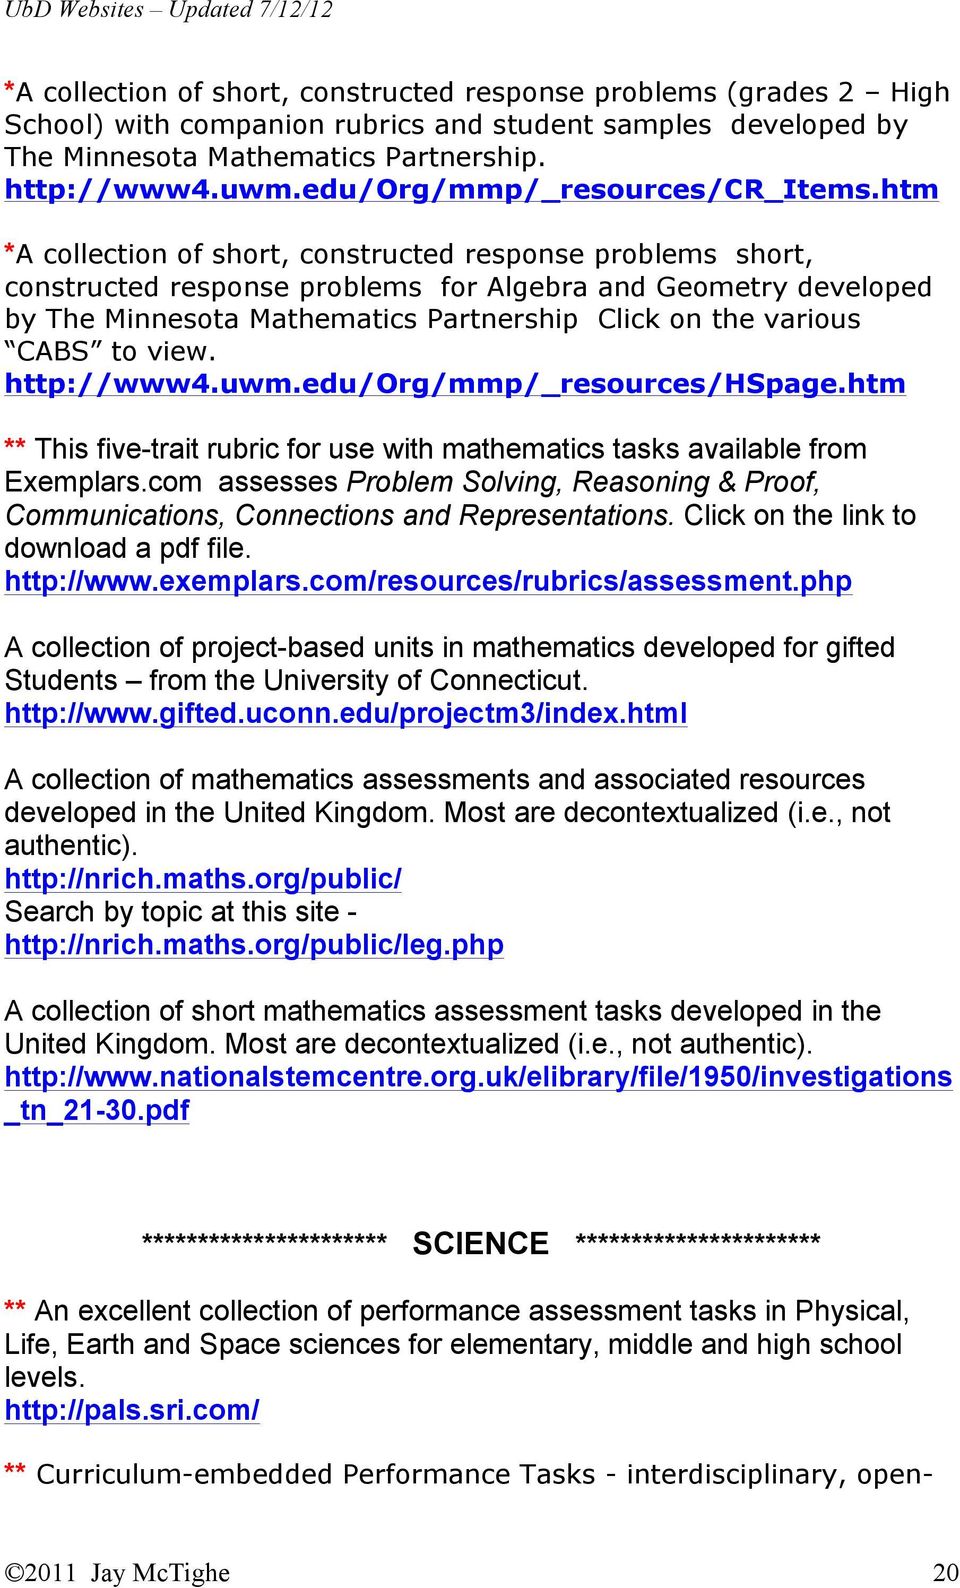 htm *A collection of short, constructed response problems short, constructed response problems for Algebra and Geometry developed by The Minnesota Mathematics Partnership Click on the various CABS to